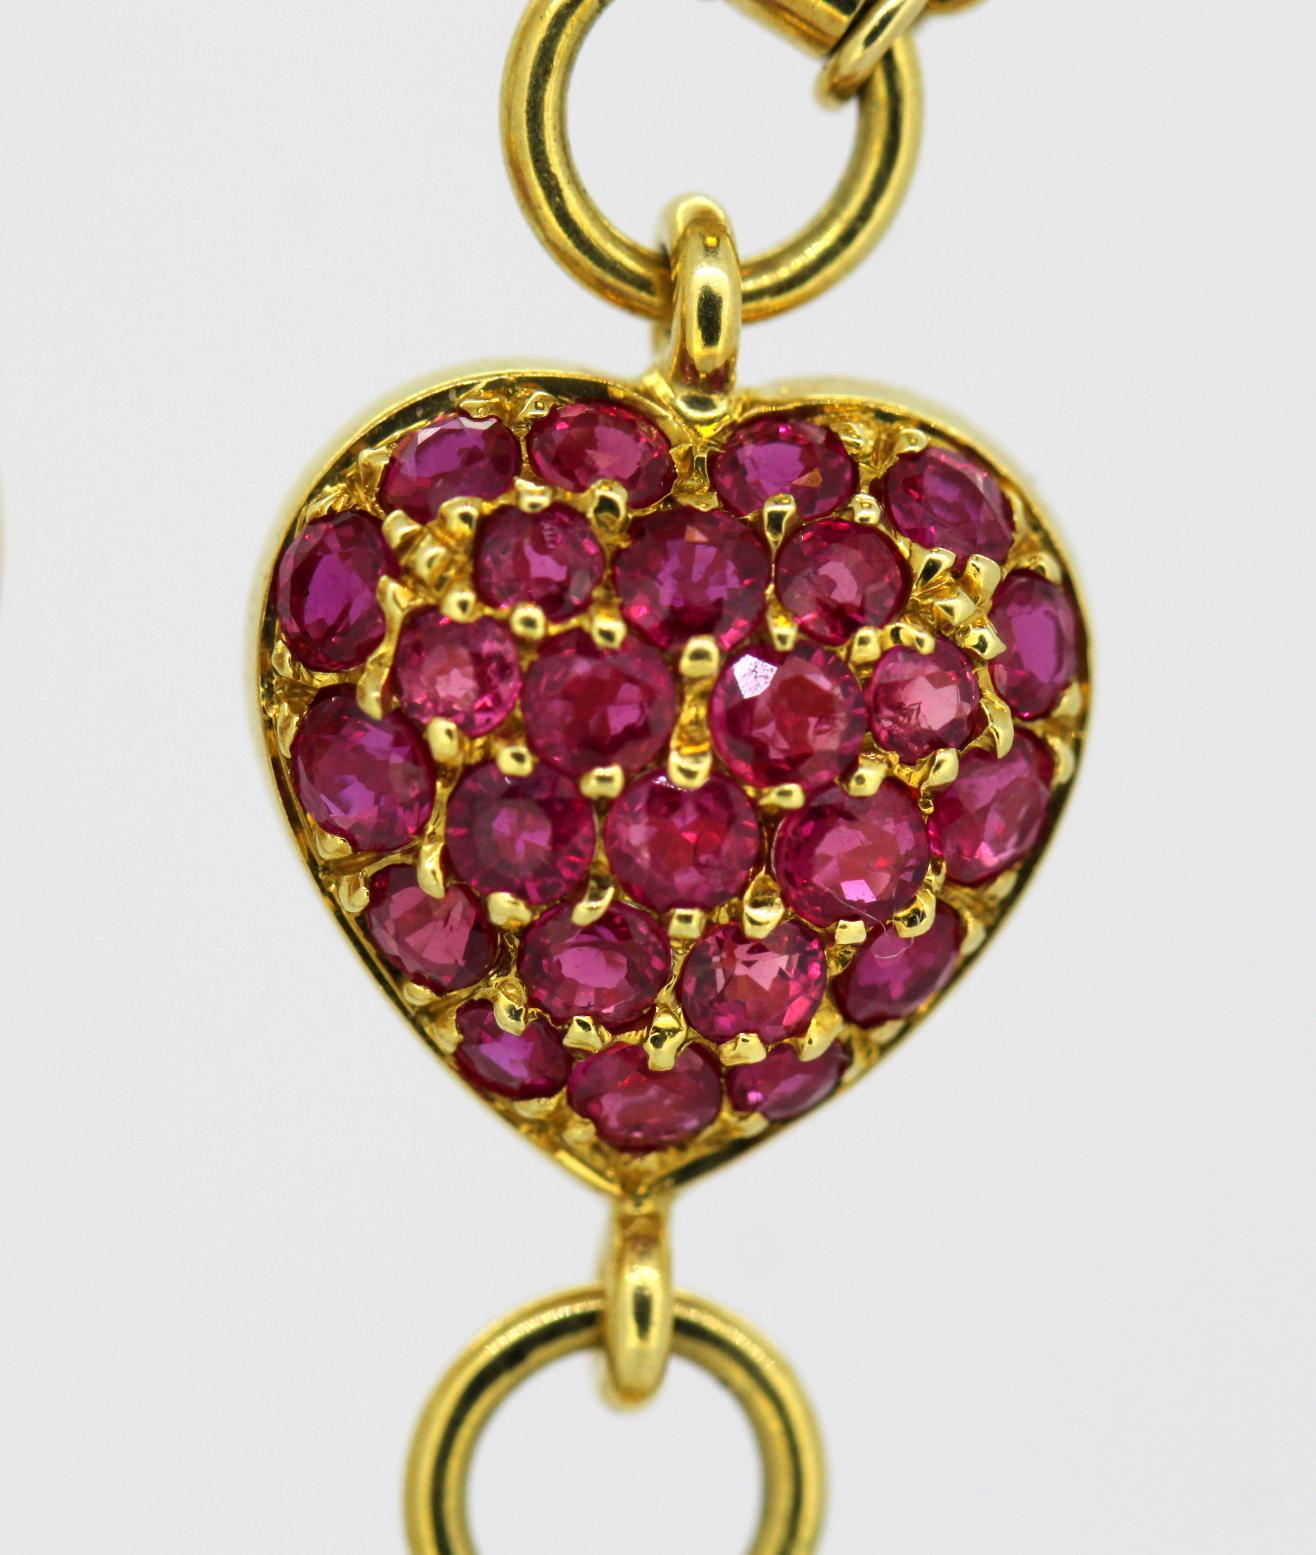 Moussaieff 18 Karat Gold Ladies Necklace Pendant Watch with Diamonds and Rubies 1